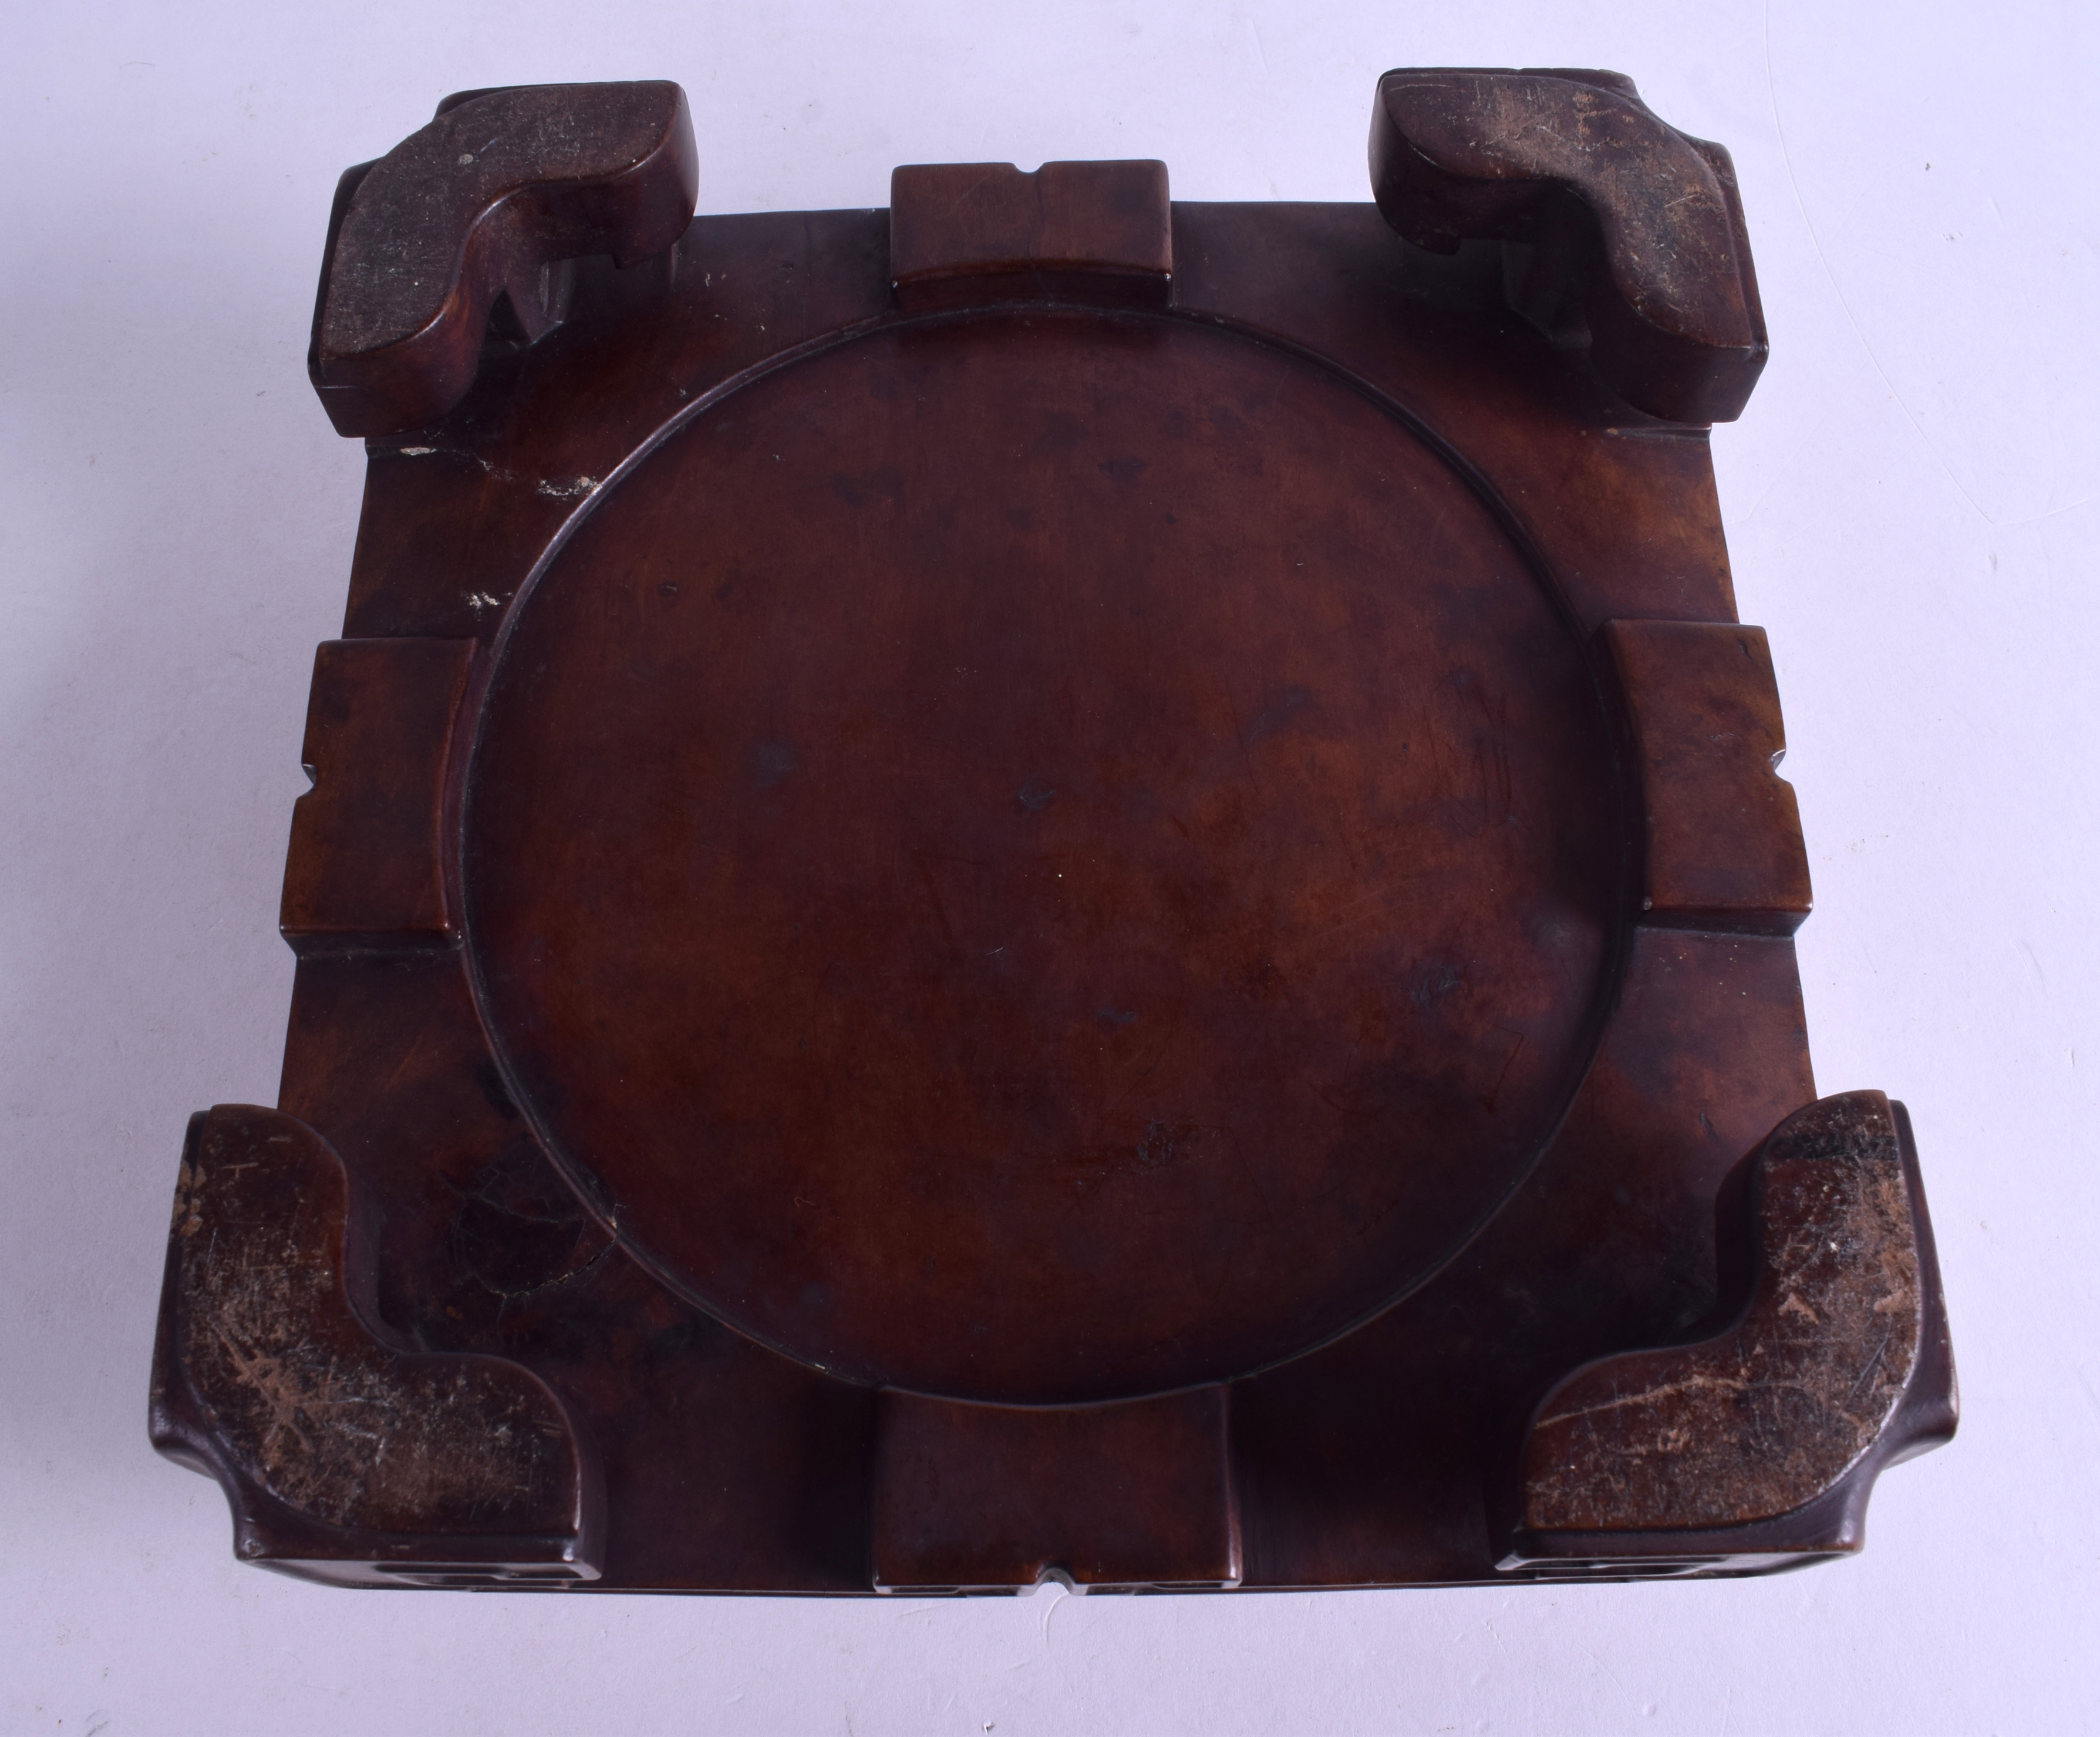 A FINE 19TH CENTURY CHINESE CARVED HARDWOOD HONGMU DISPLAY STAND possibly Huanghuali. 20 cm square, - Image 4 of 4